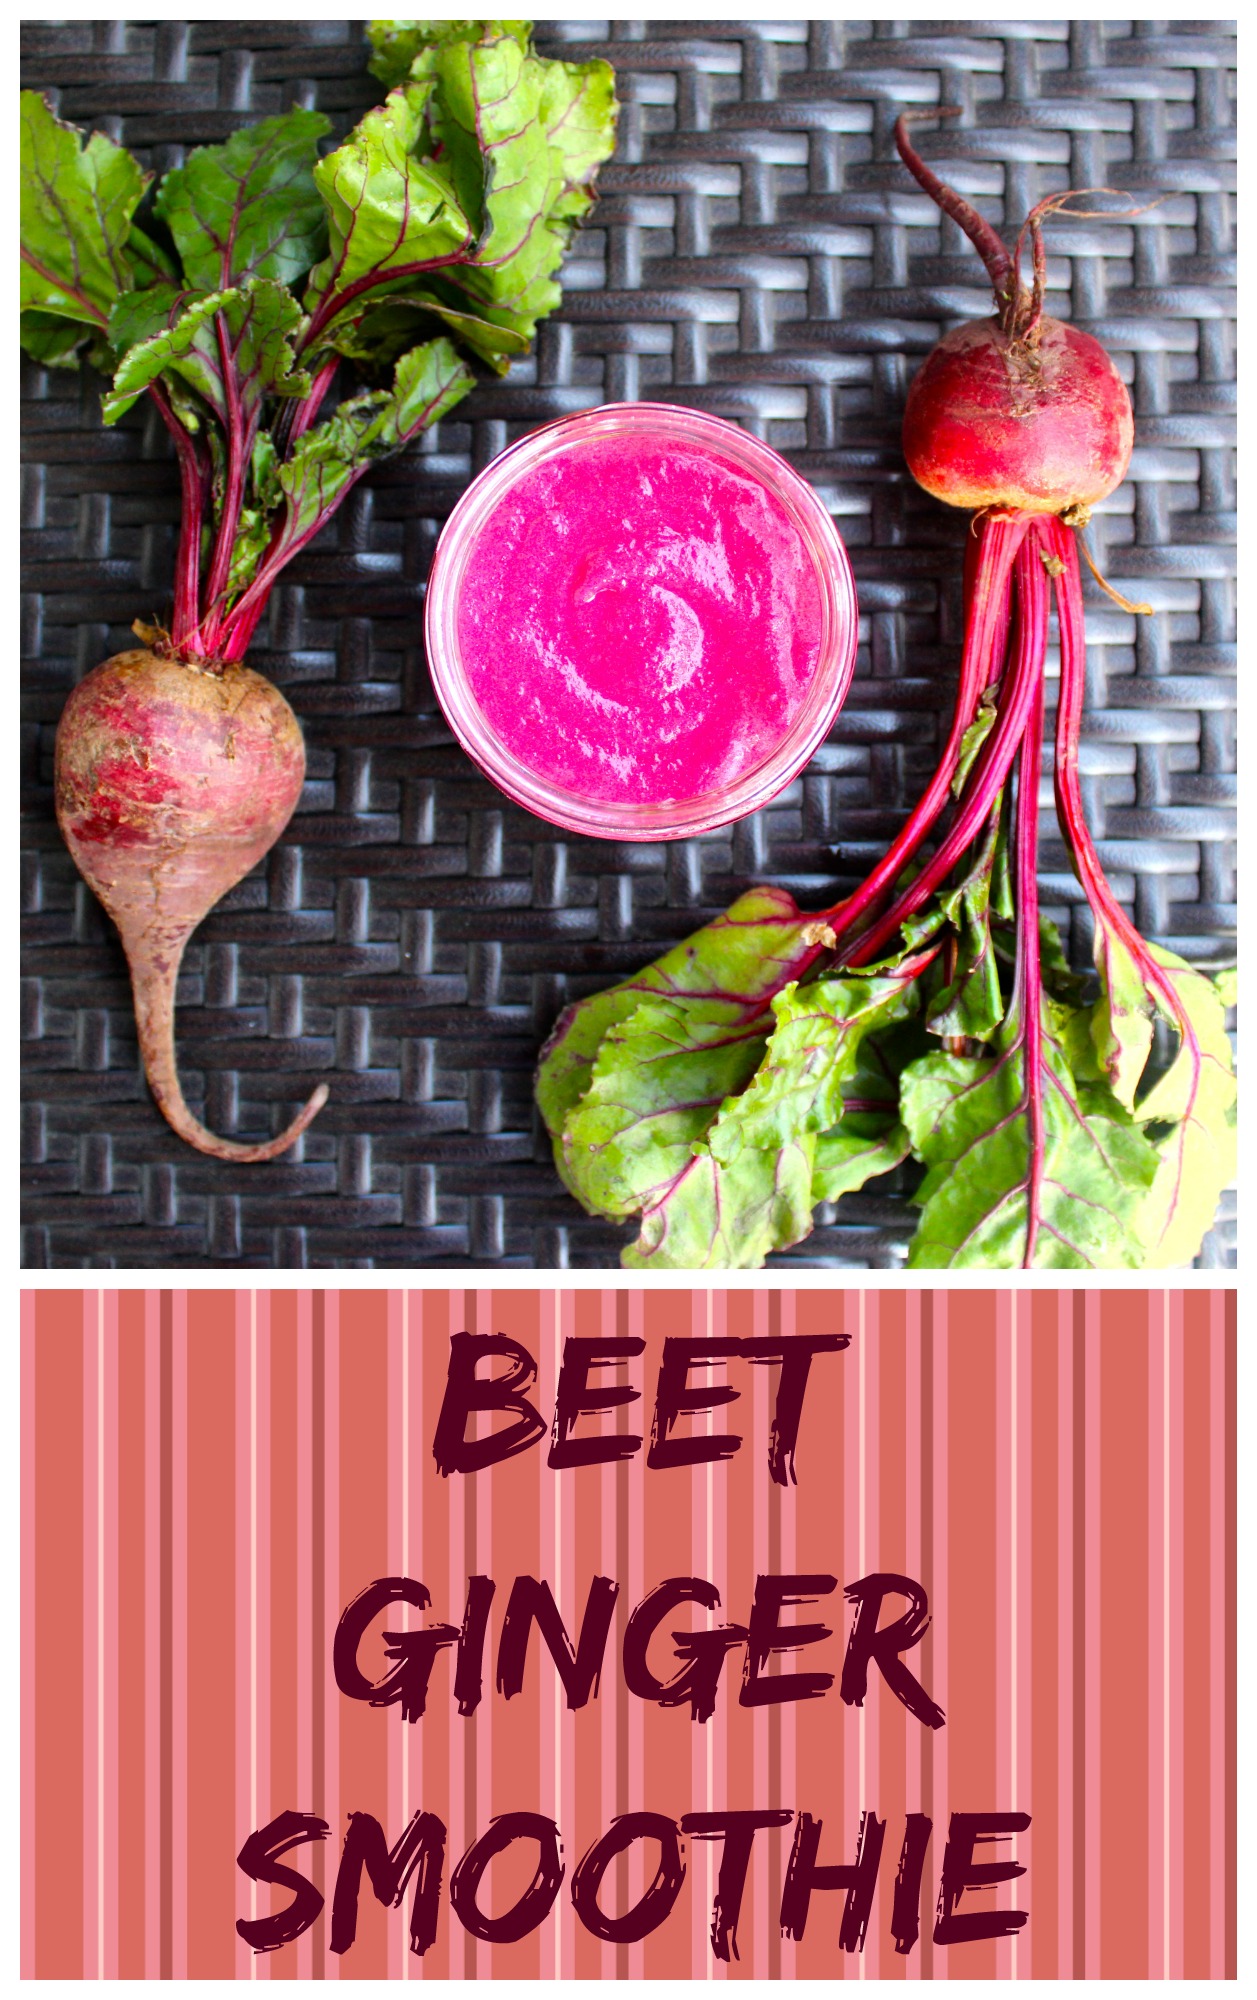 Heart Beet Ginger Smoothie